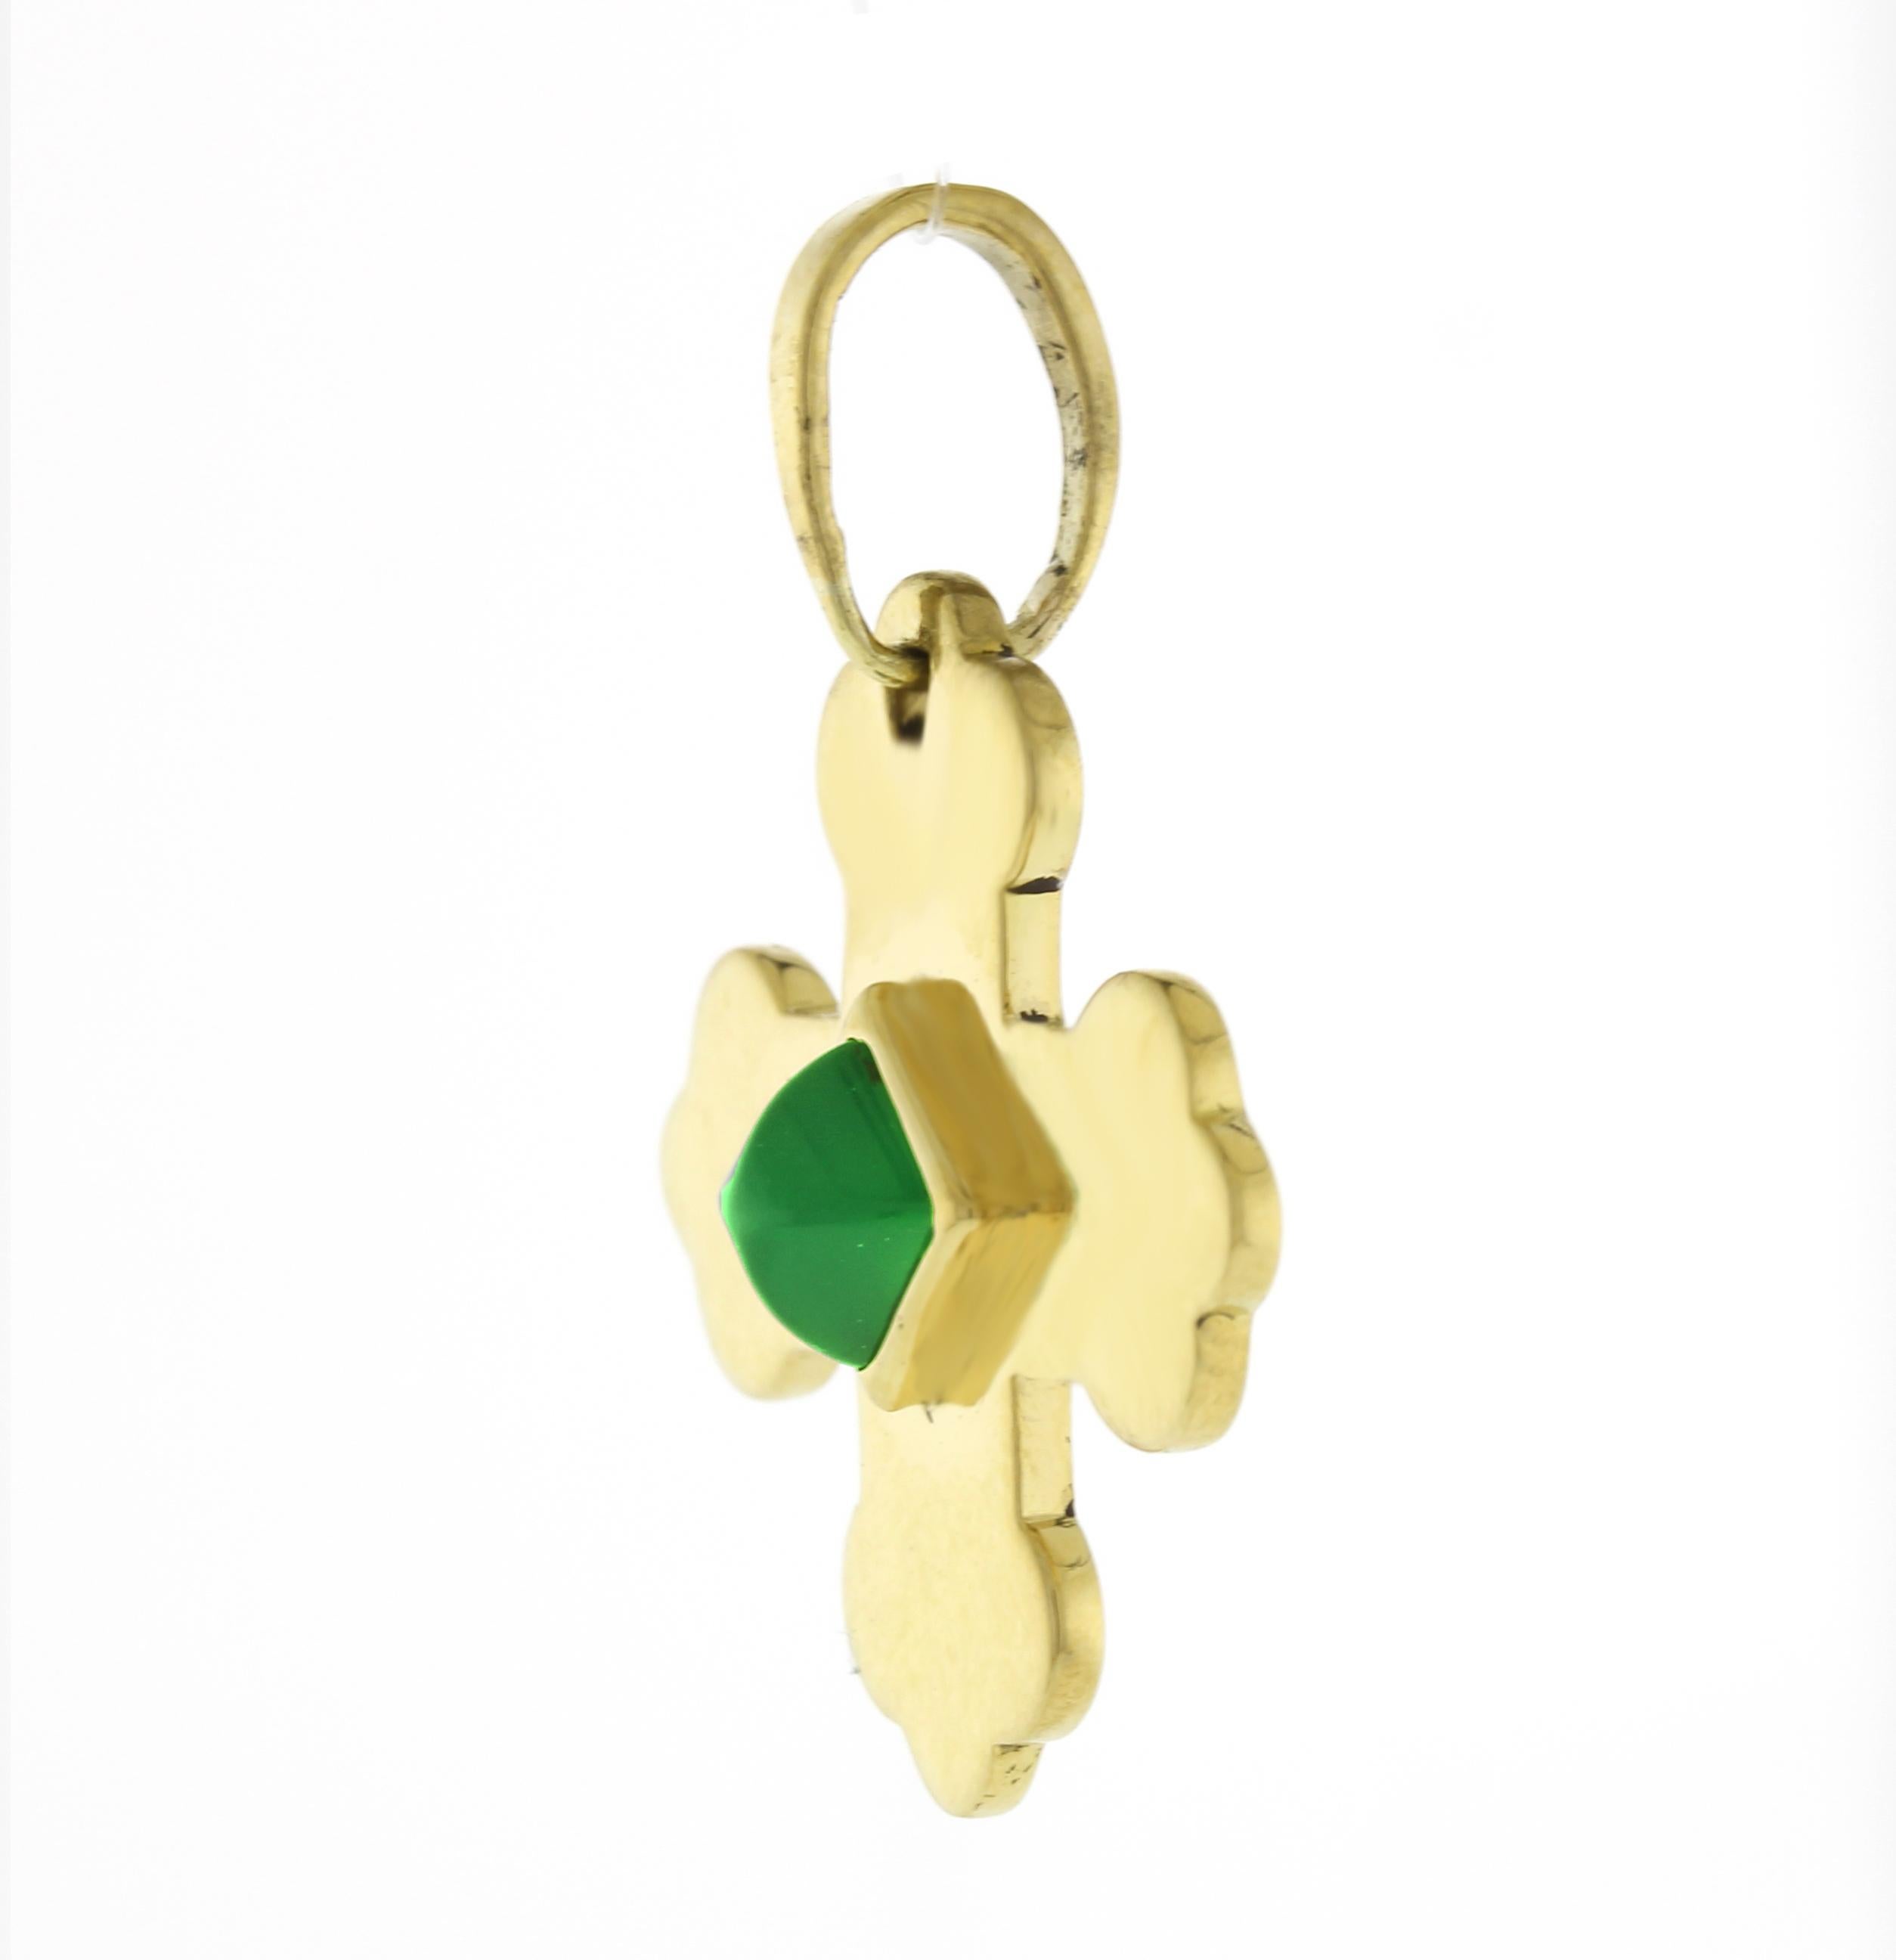 This 18kt yellow gold pendant contains chrysoprase.
• Metal:18kt Yellow Gold
• Circa: 1980s
• Gemstone: Chrysoprase
• Gemstone cut: Sugarloaf
• Dimensions: 15/16 in x 15/16 in
• Weight: 5.5 grams
• Packaging: Pampillonia presentation box
•